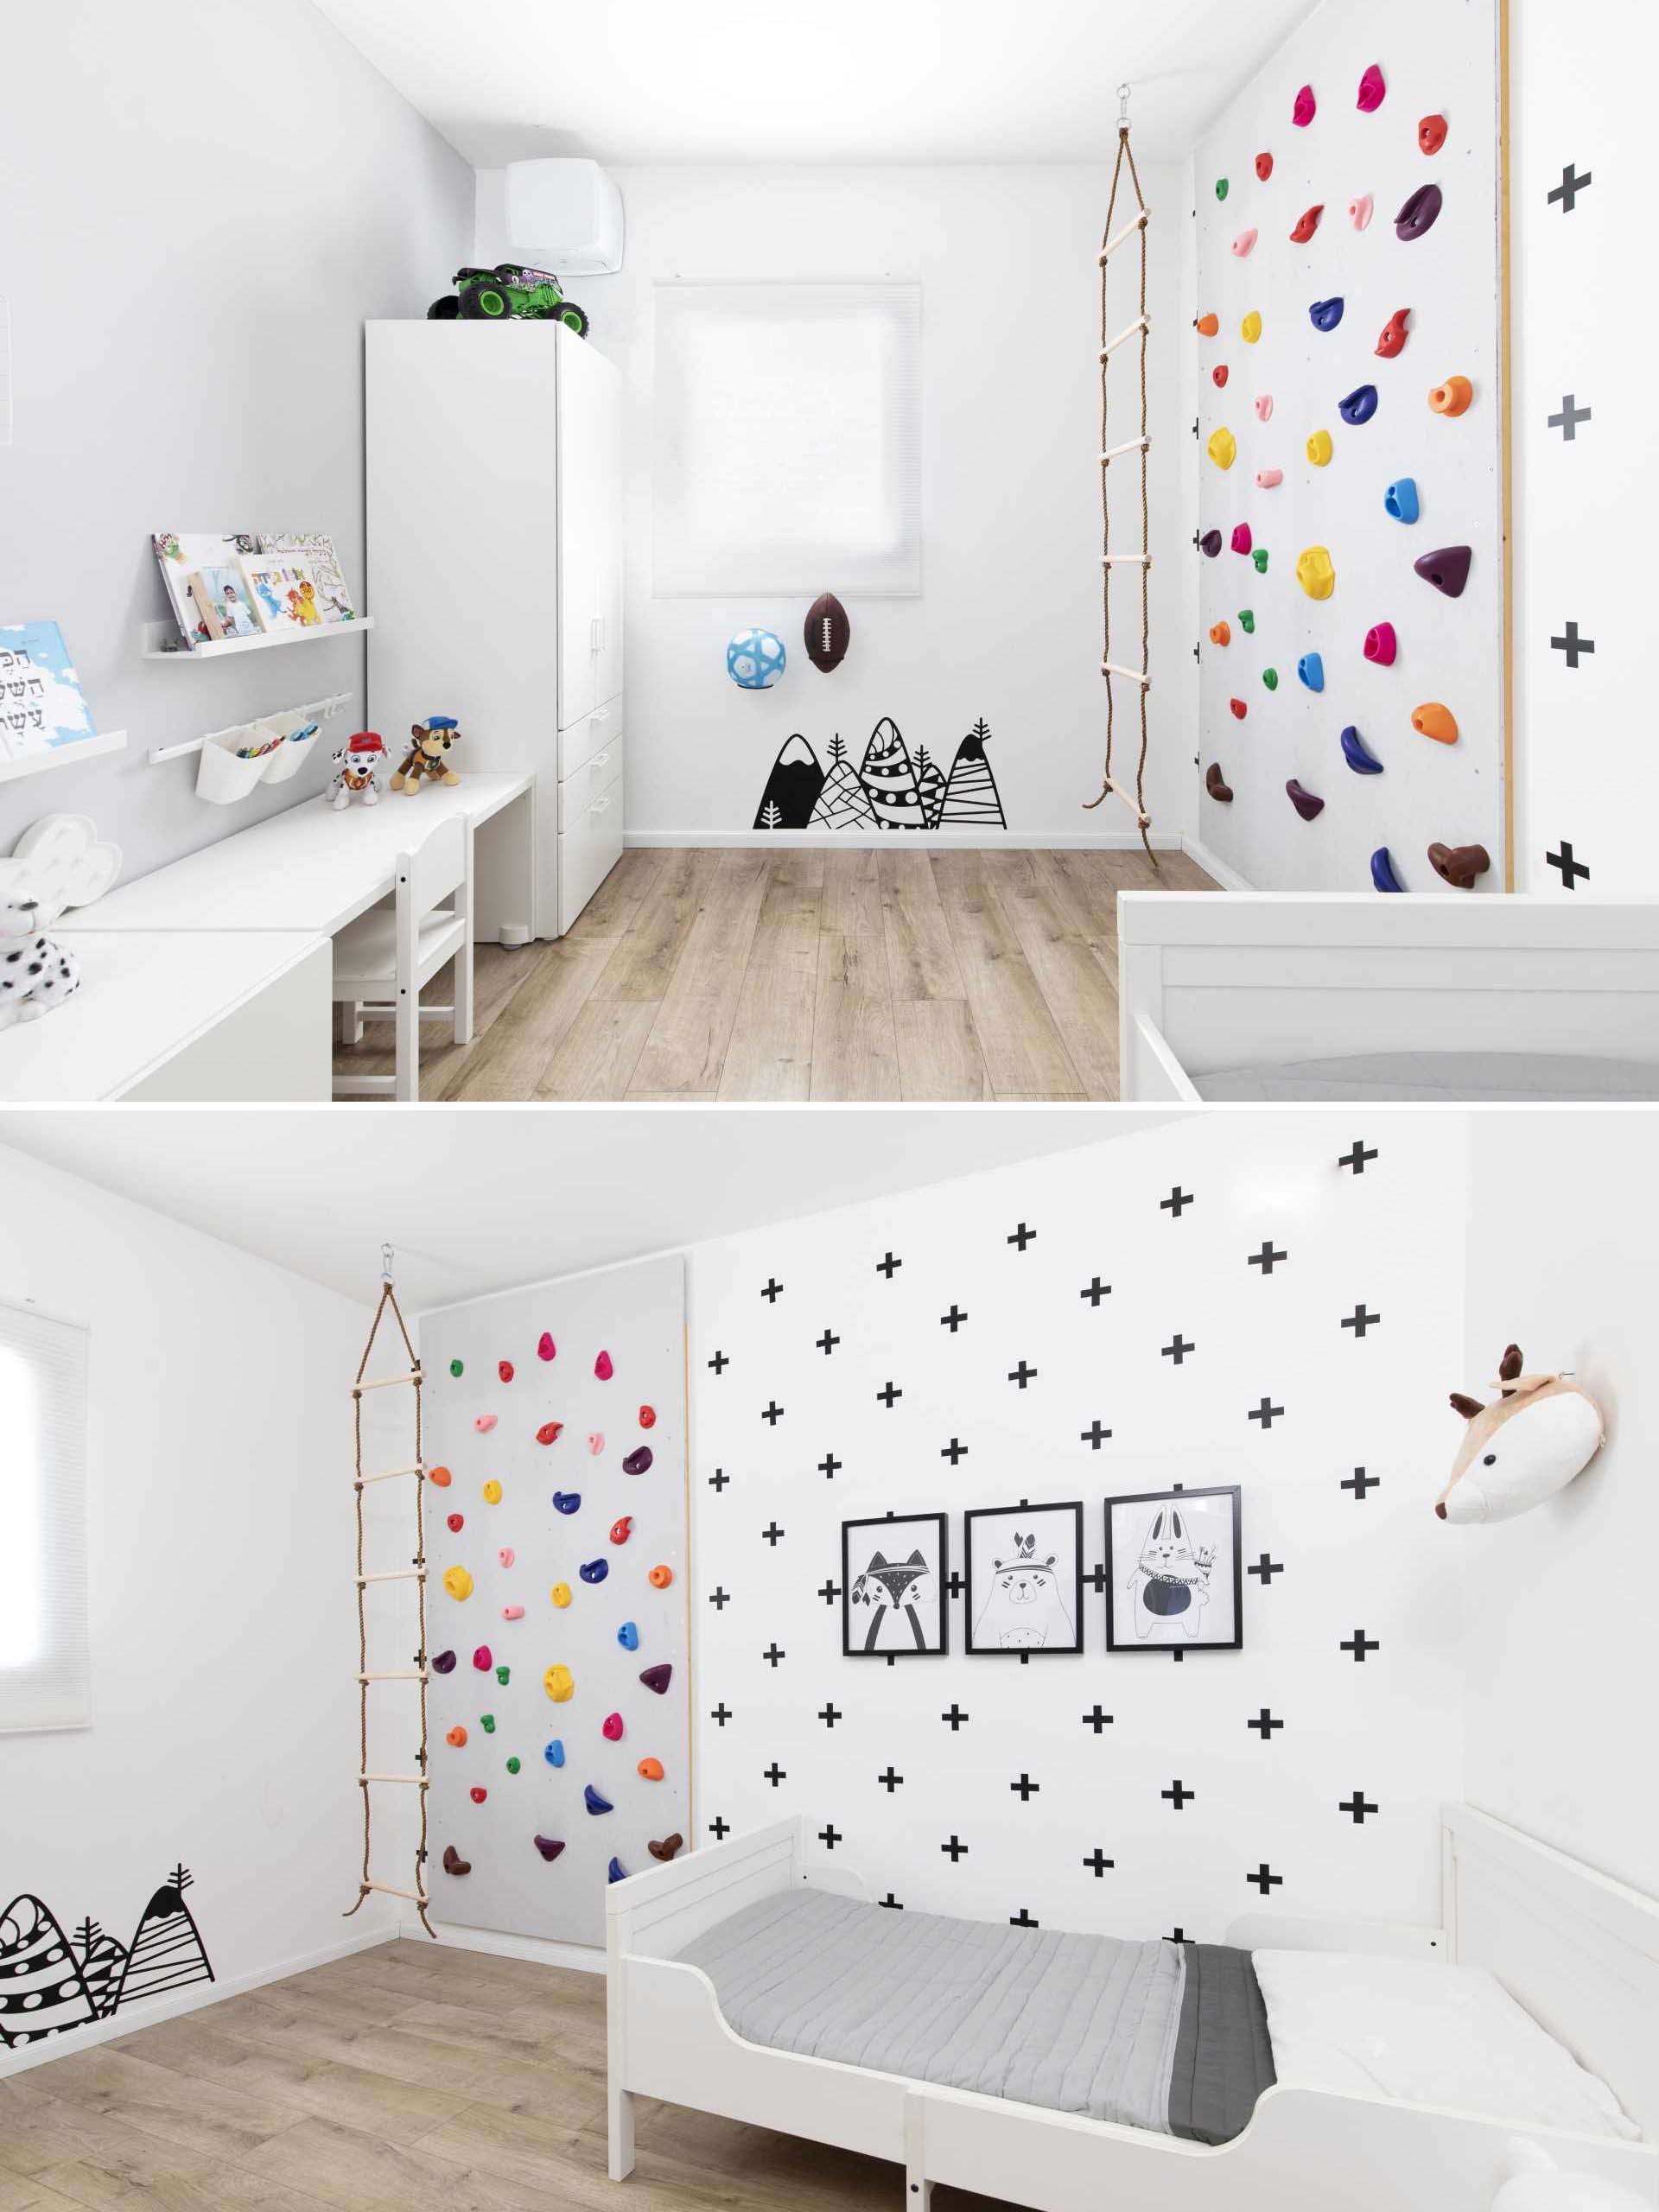 In this modern bedroom for a young boy, the designers created a climbing wall, added a rope ladder, and included stickers to add a Nordic touch.